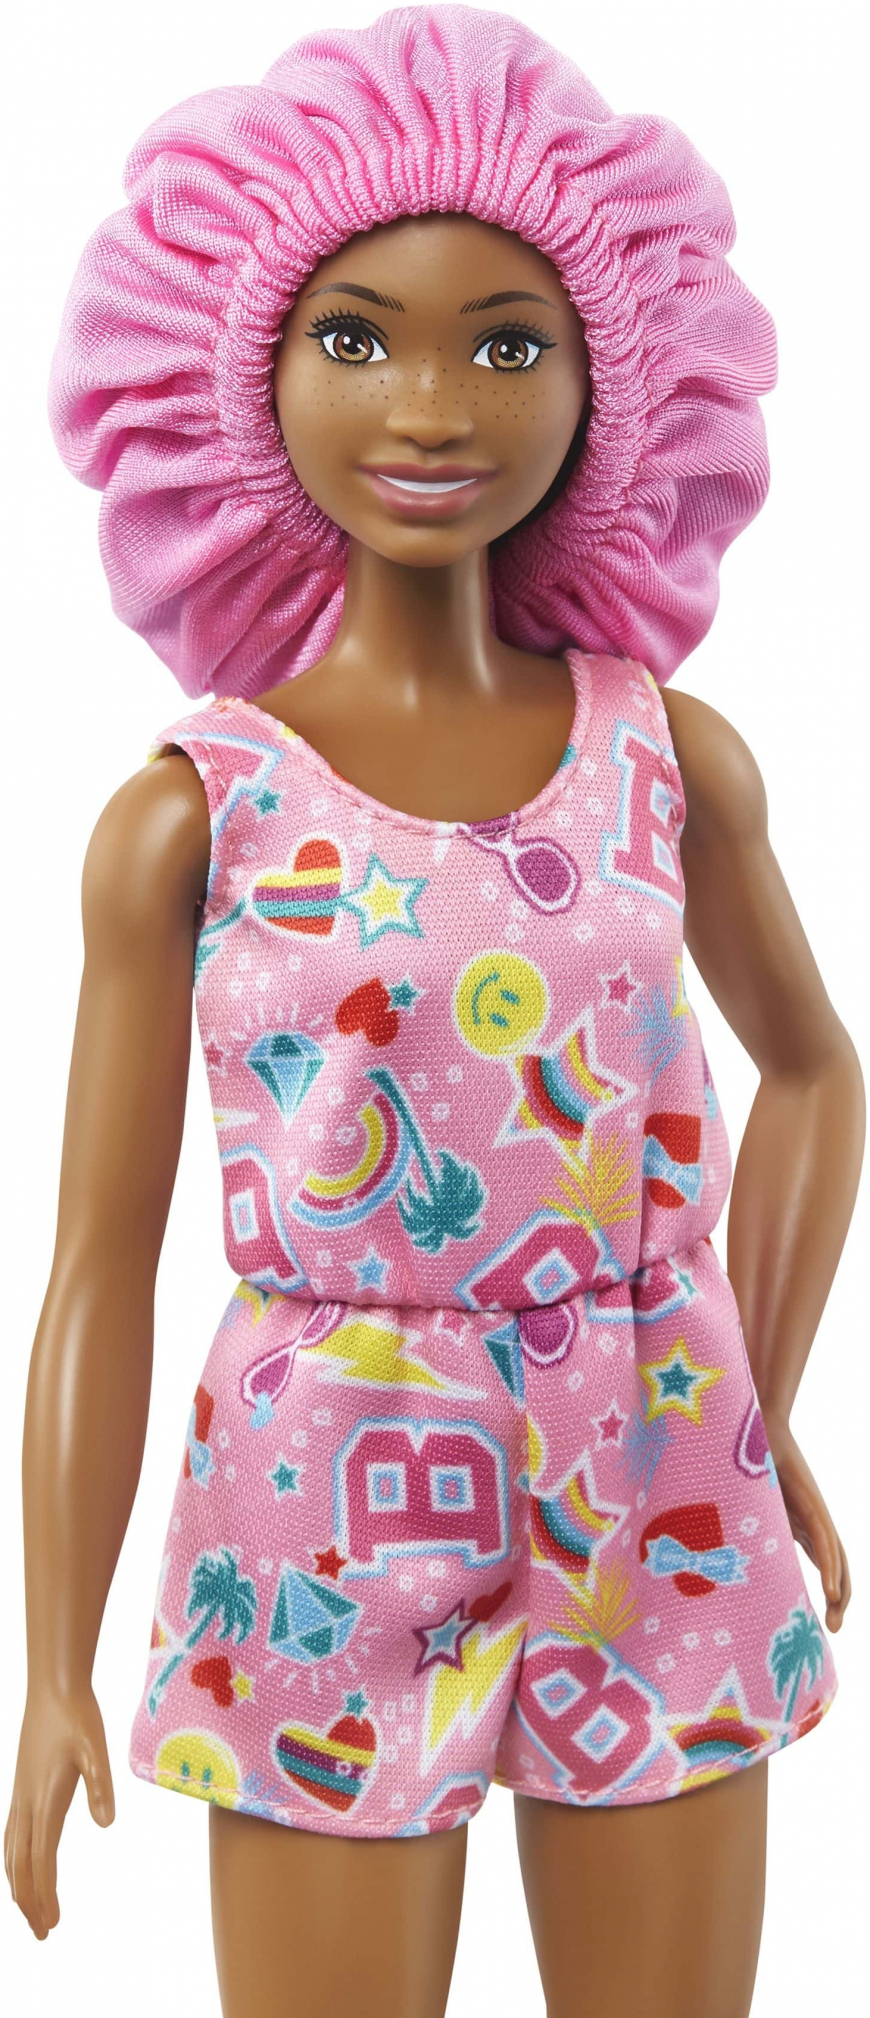 Barbie Life in The City Brooklyn Hair Playset 2022 doll